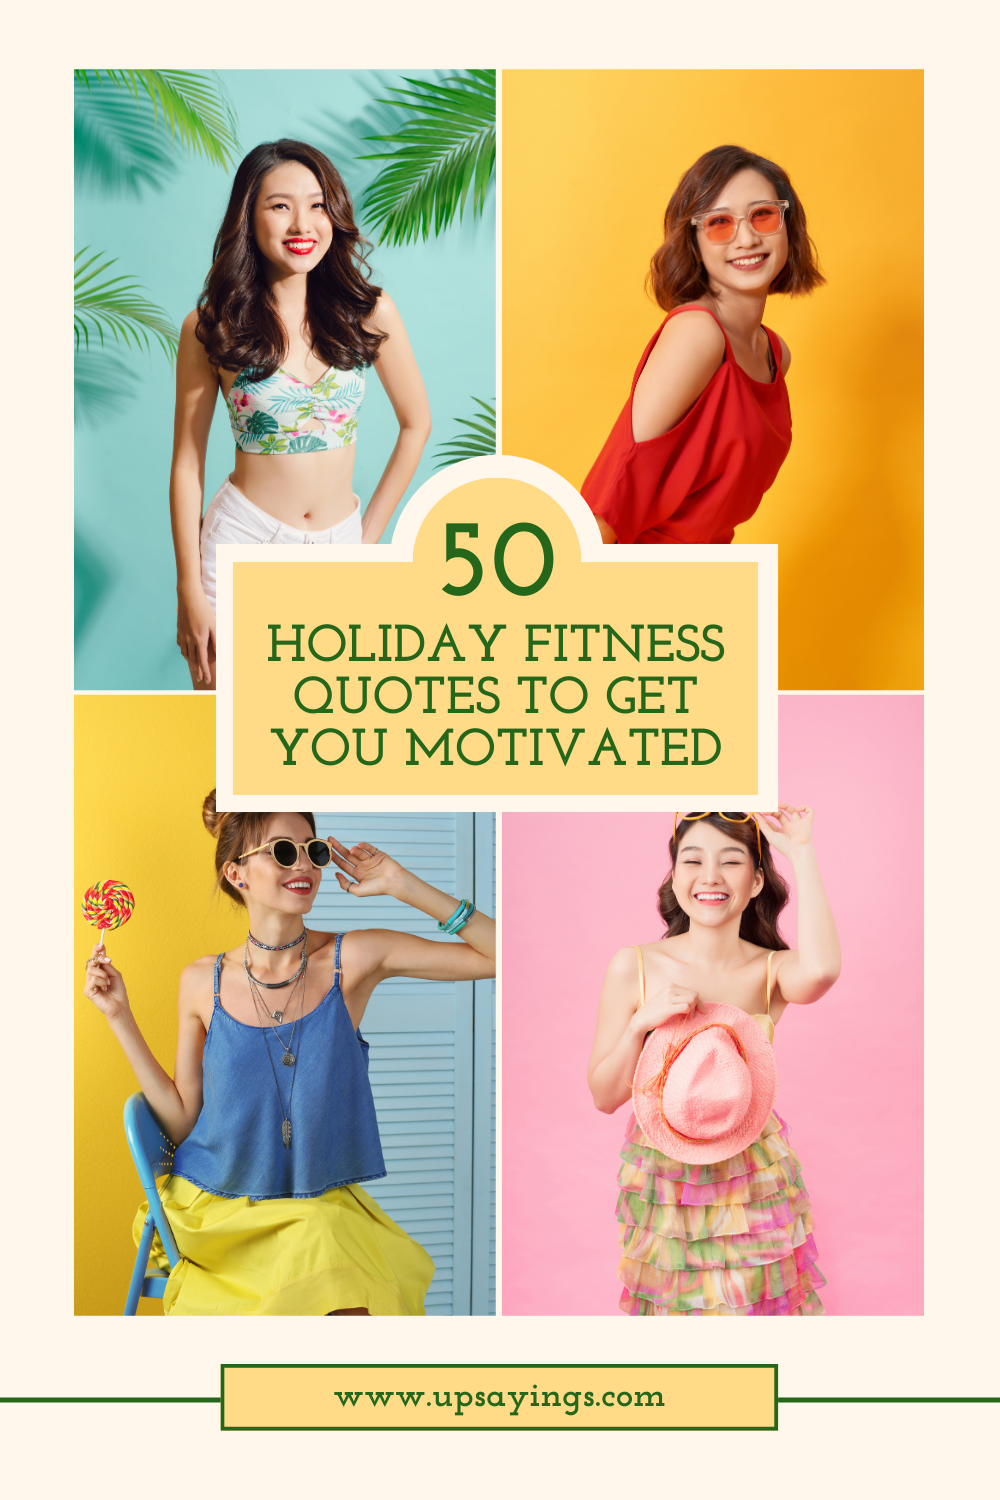 10 Inspirational Holiday Fitness Quotes for Your Motivation and Well-being, by Haider Ali